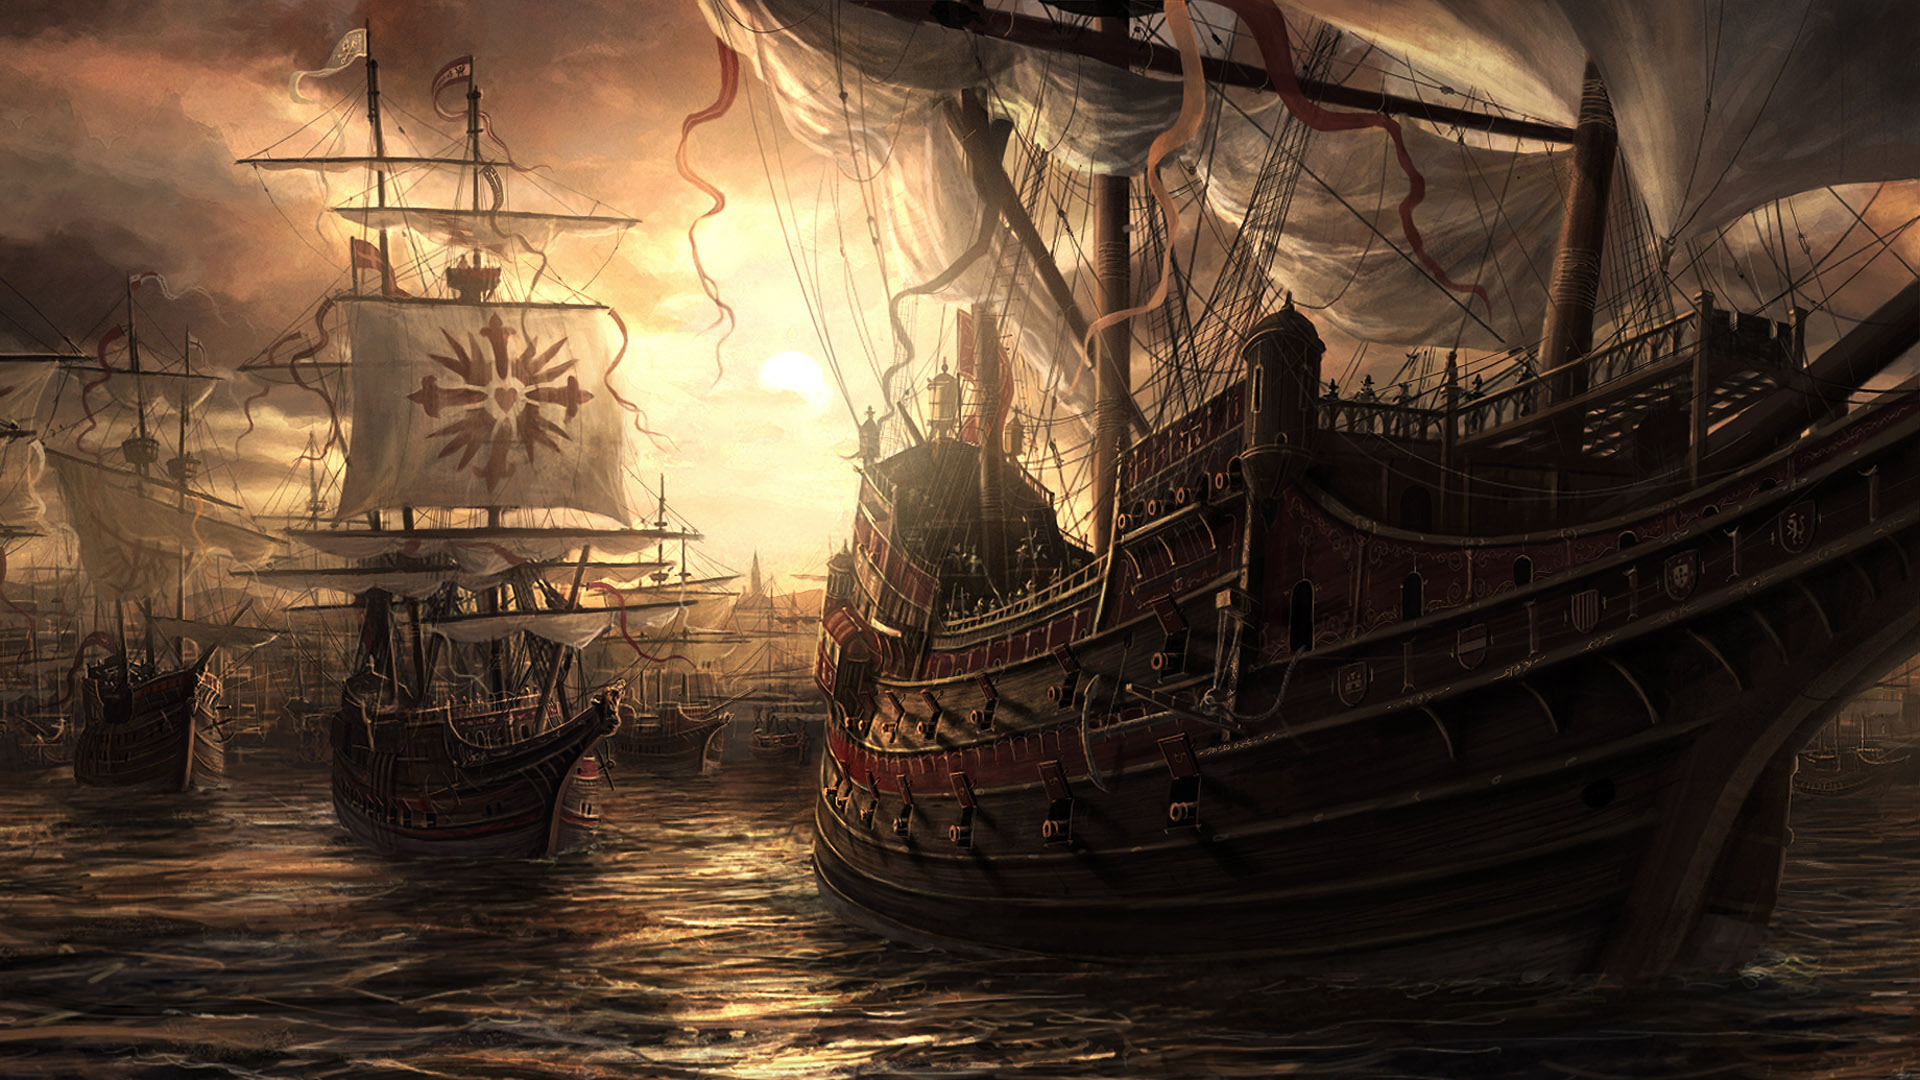 only hd wallpaper,sailing ship,galleon,manila galleon,first rate,fluyt